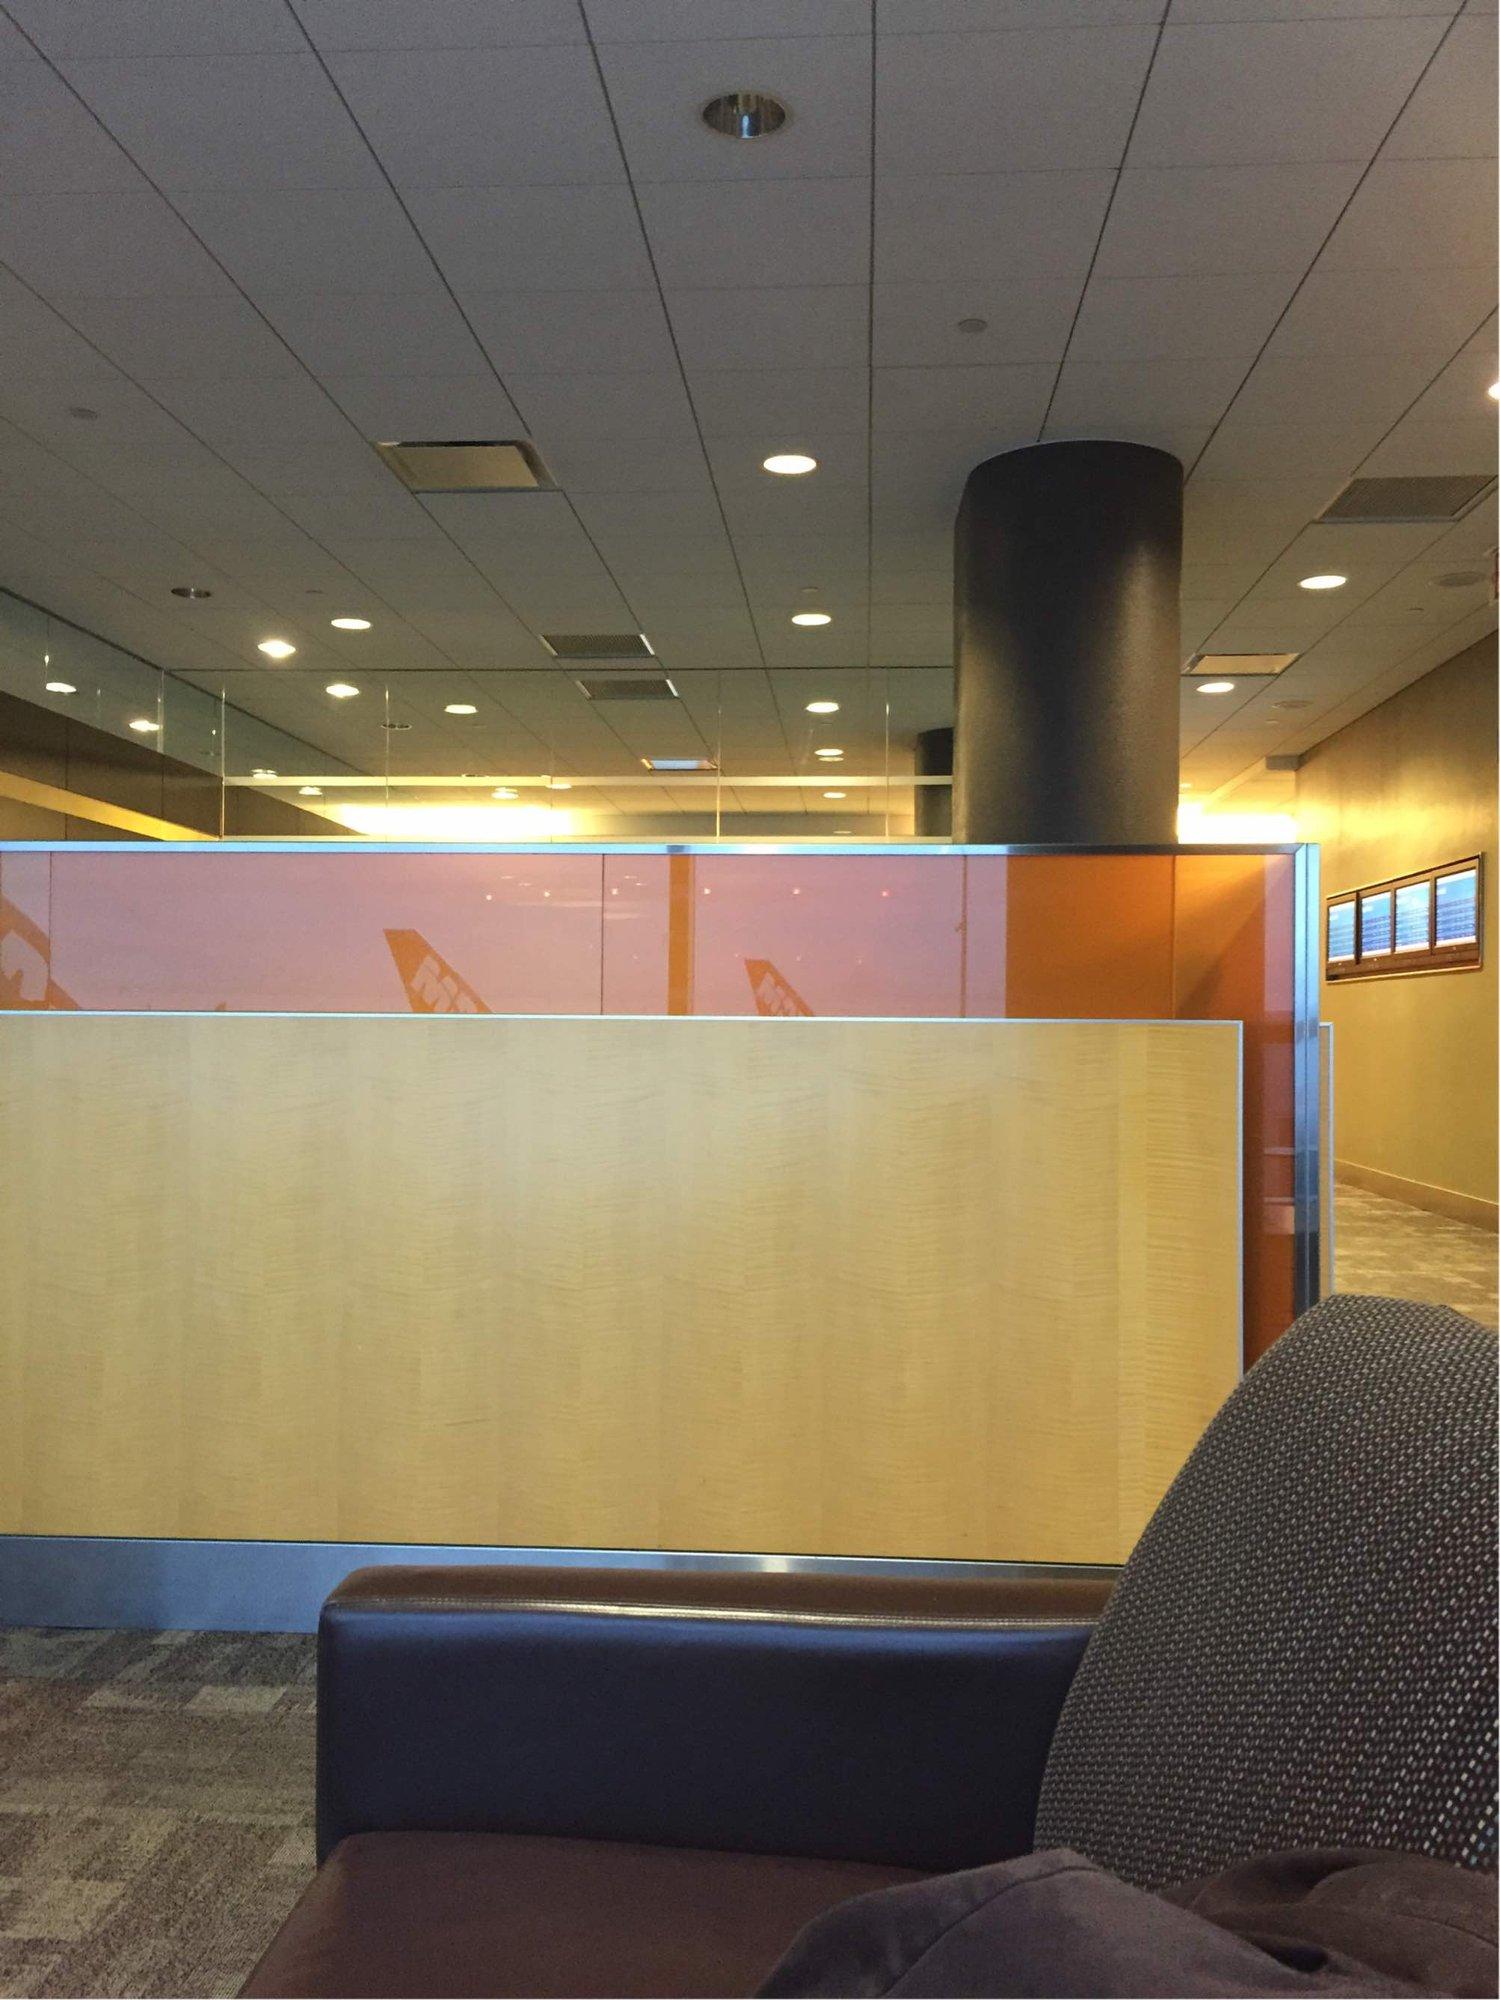 American Airlines Admirals Club image 21 of 25